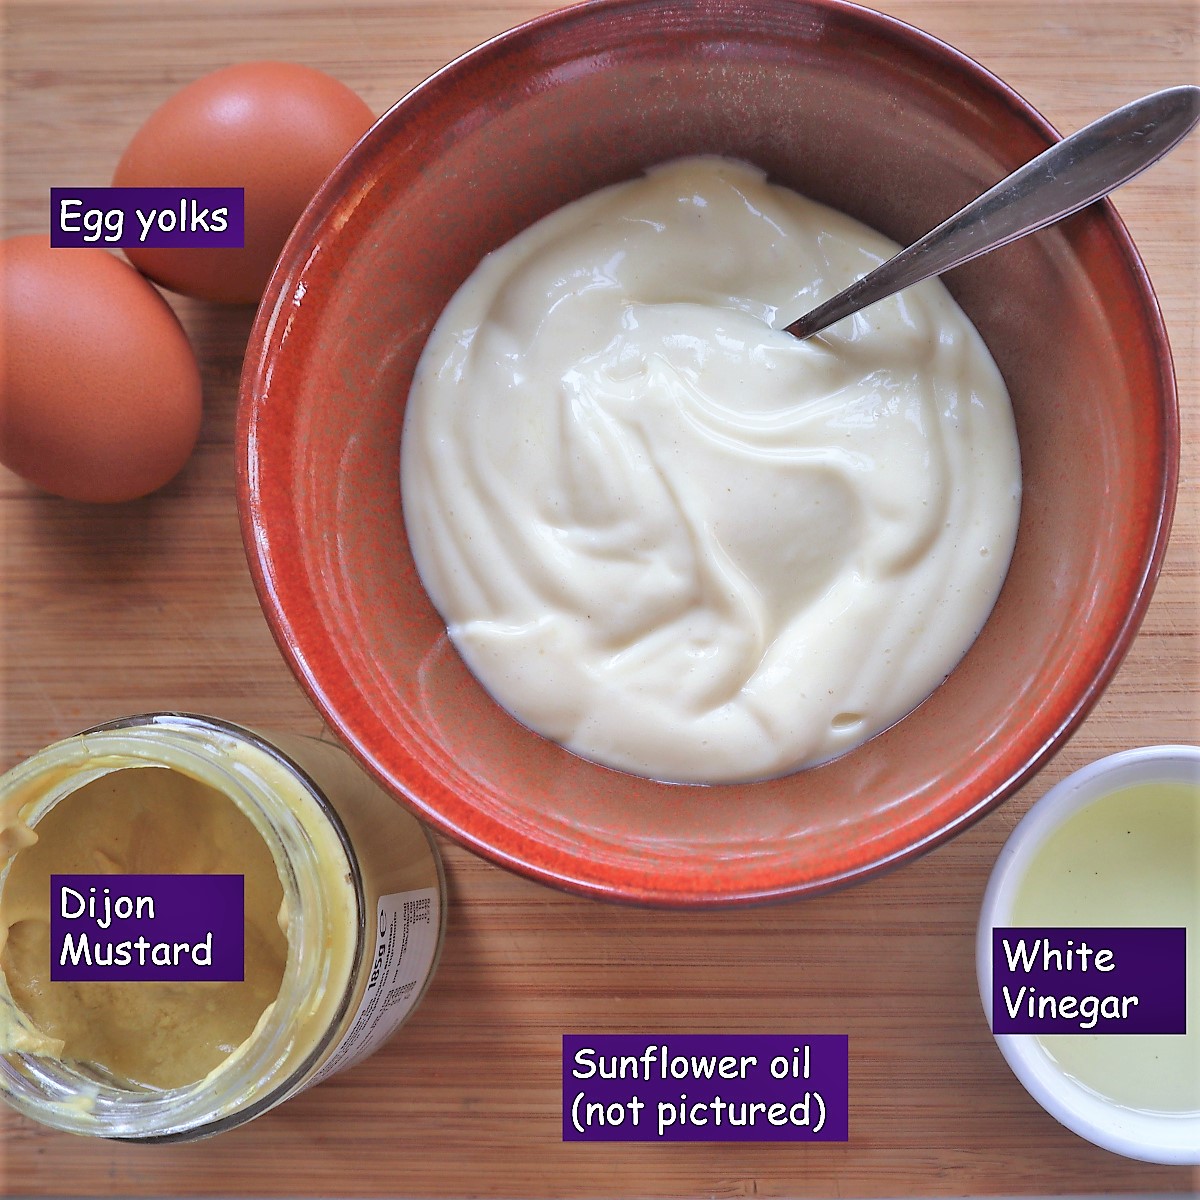 Ingredients for making mayonnaise.